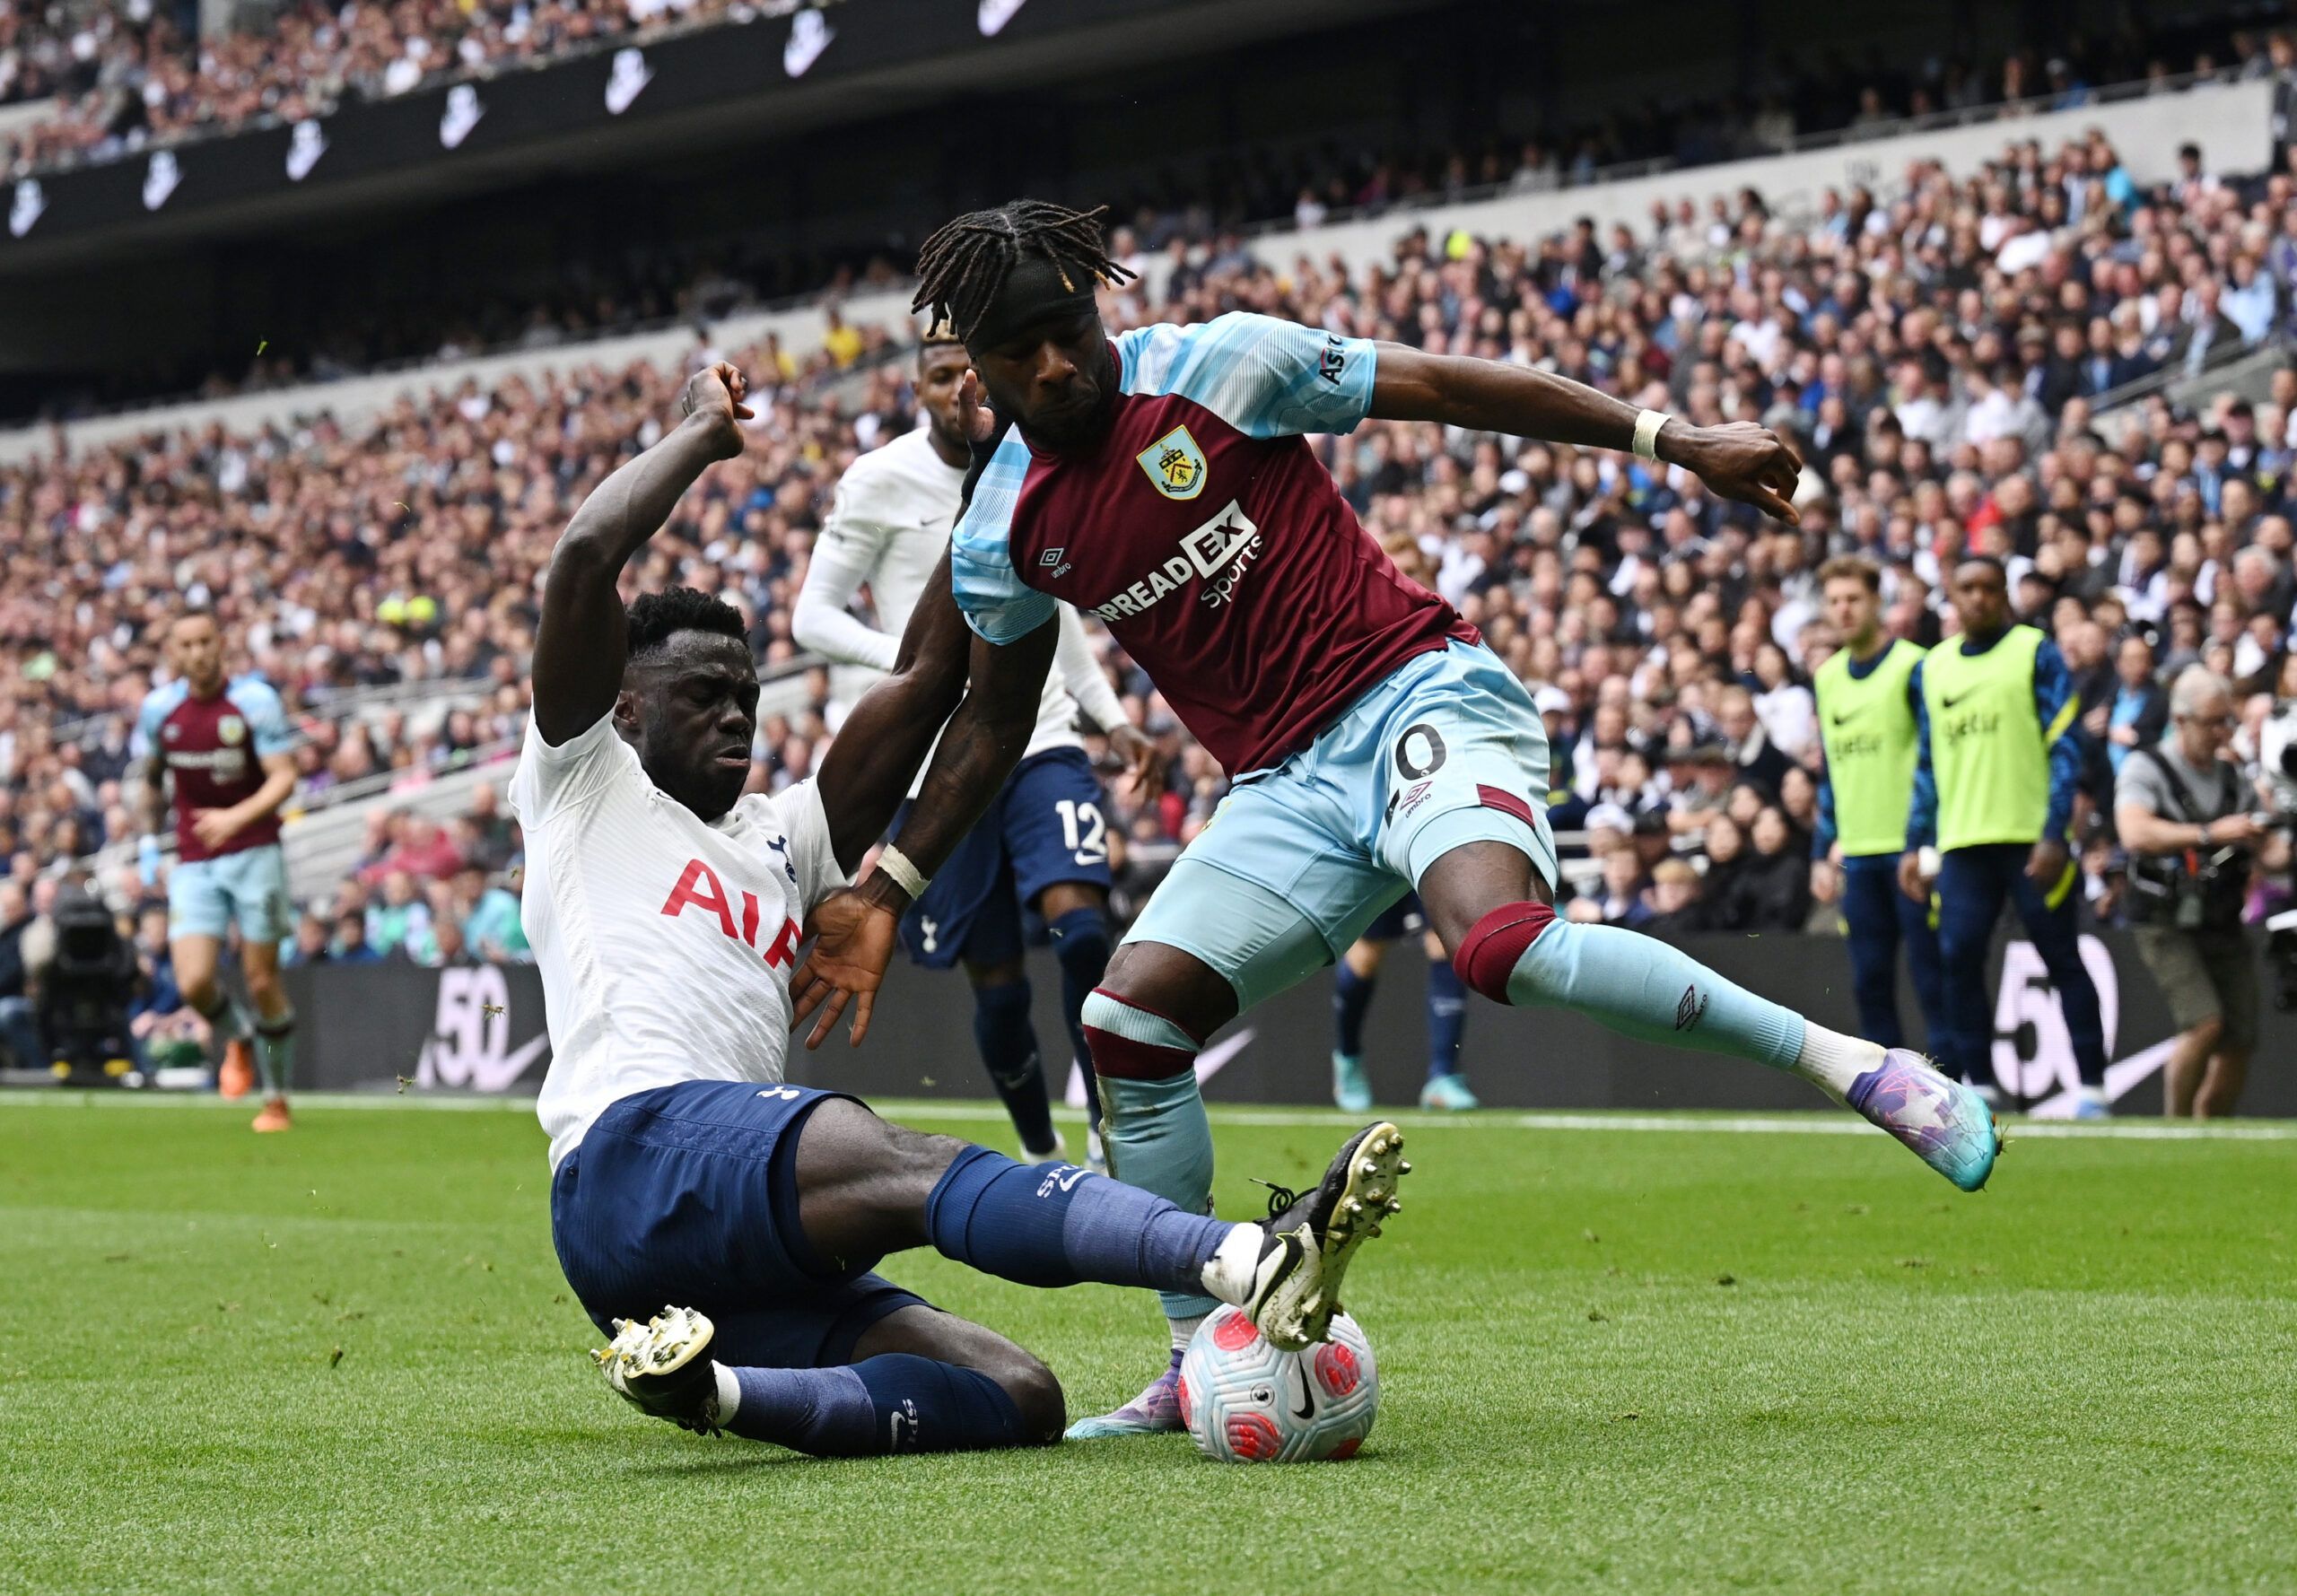 Soccer Football - Premier League - Tottenham Hotspur v Burnley - Tottenham Hotspur Stadium, London, Britain - May 15, 2022 Tottenham Hotspur's Davinson Sanchez in action with Burnley's Maxwel Cornet REUTERS/Dylan Martinez EDITORIAL USE ONLY. No use with unauthorized audio, video, data, fixture lists, club/league logos or 'live' services. Online in-match use limited to 75 images, no video emulation. No use in betting, games or single club /league/player publications.  Please contact your account 